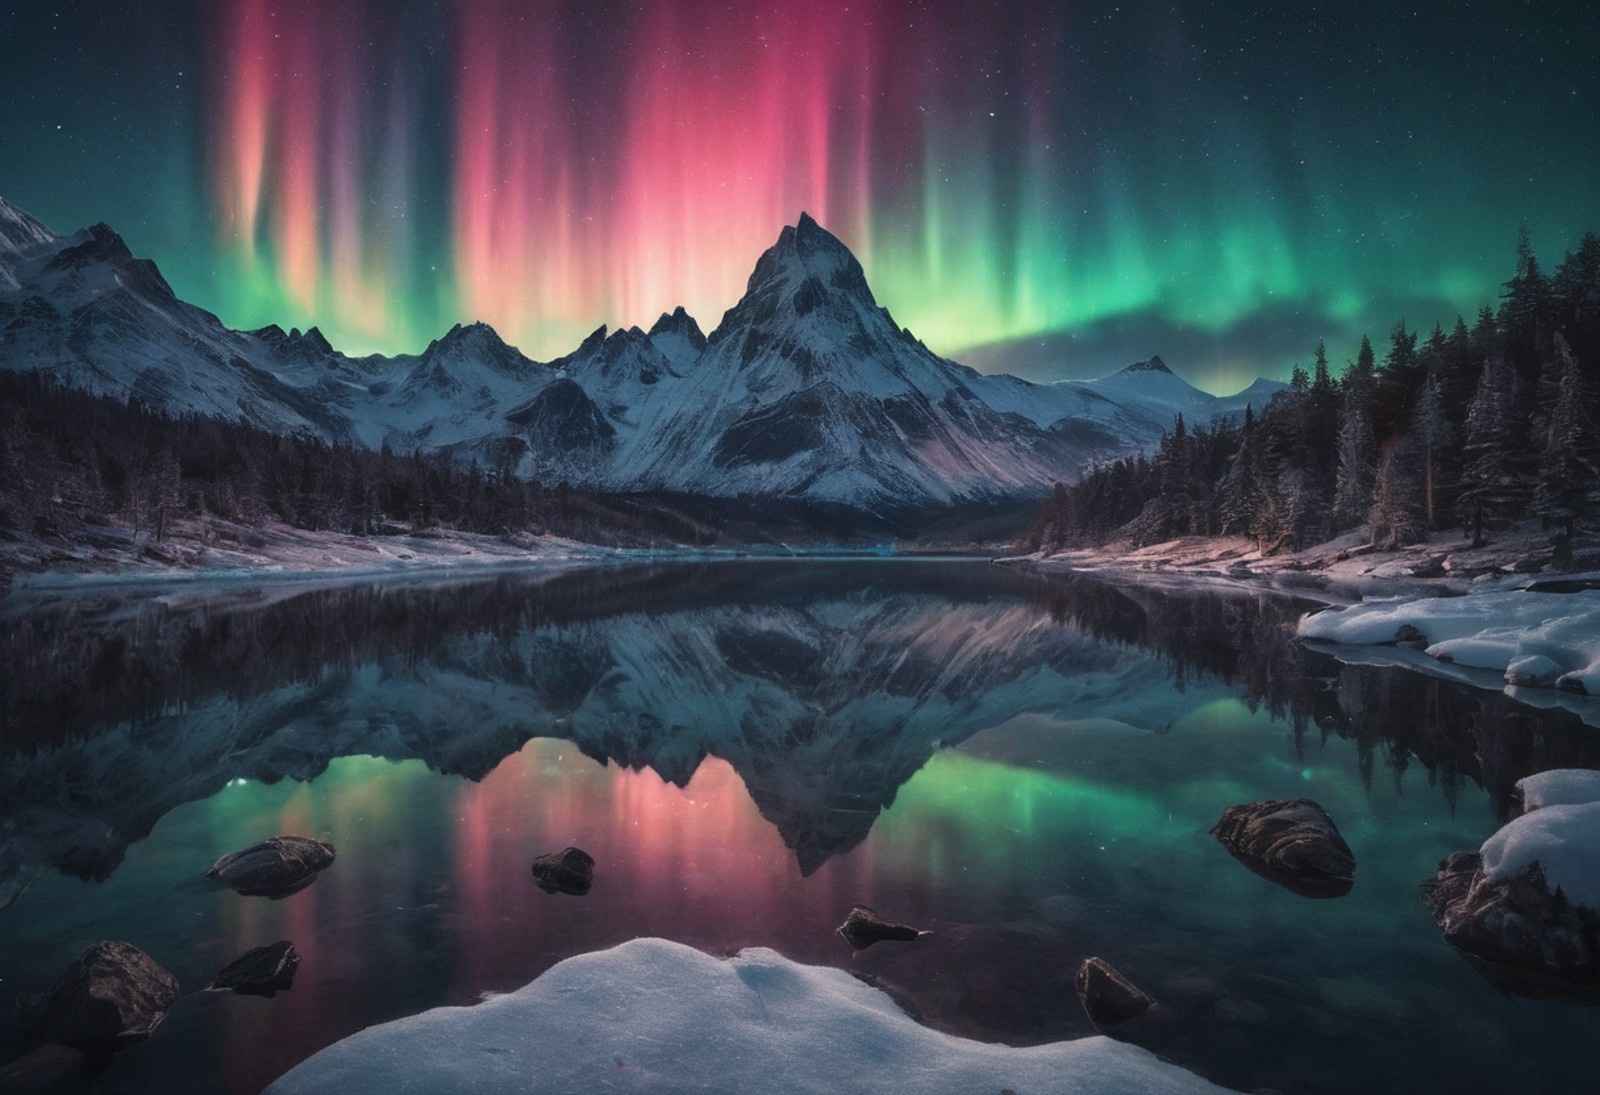 A mesmerizing landscape photograph depicting the aurora dancing over an alpine lake, inspired by the ethereal beauty of th...